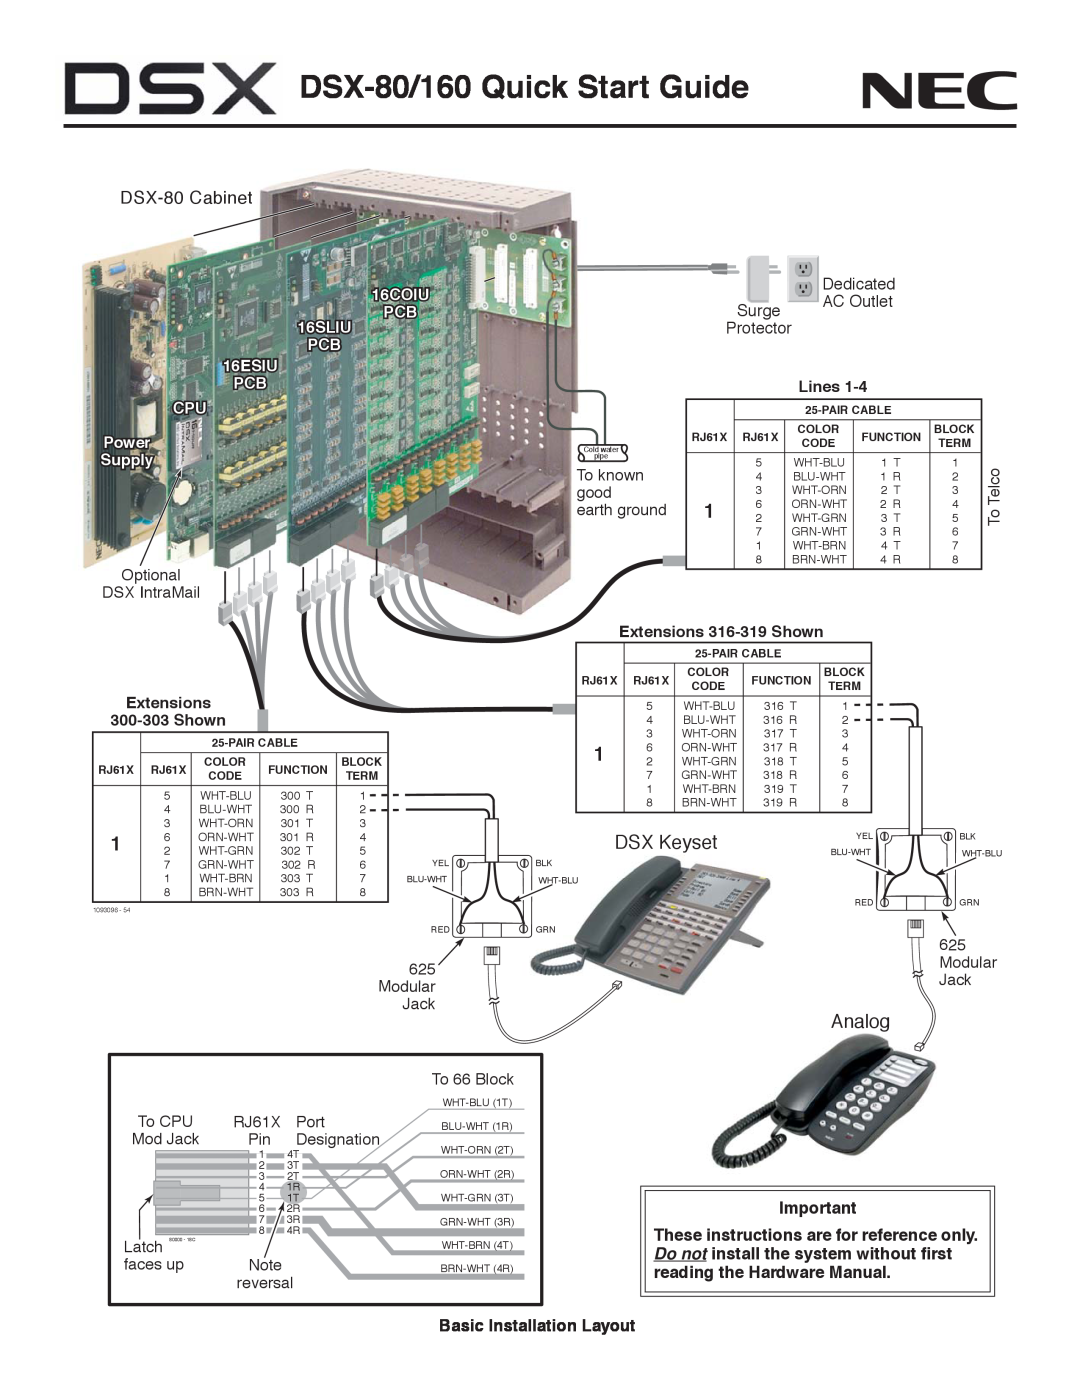 NEC DSX-160 quick start Basic Installation Layout, DSX-80/160 Quick Start Guide, DSX Keyset, Analog, DSX-80 Cabinet, Lines 